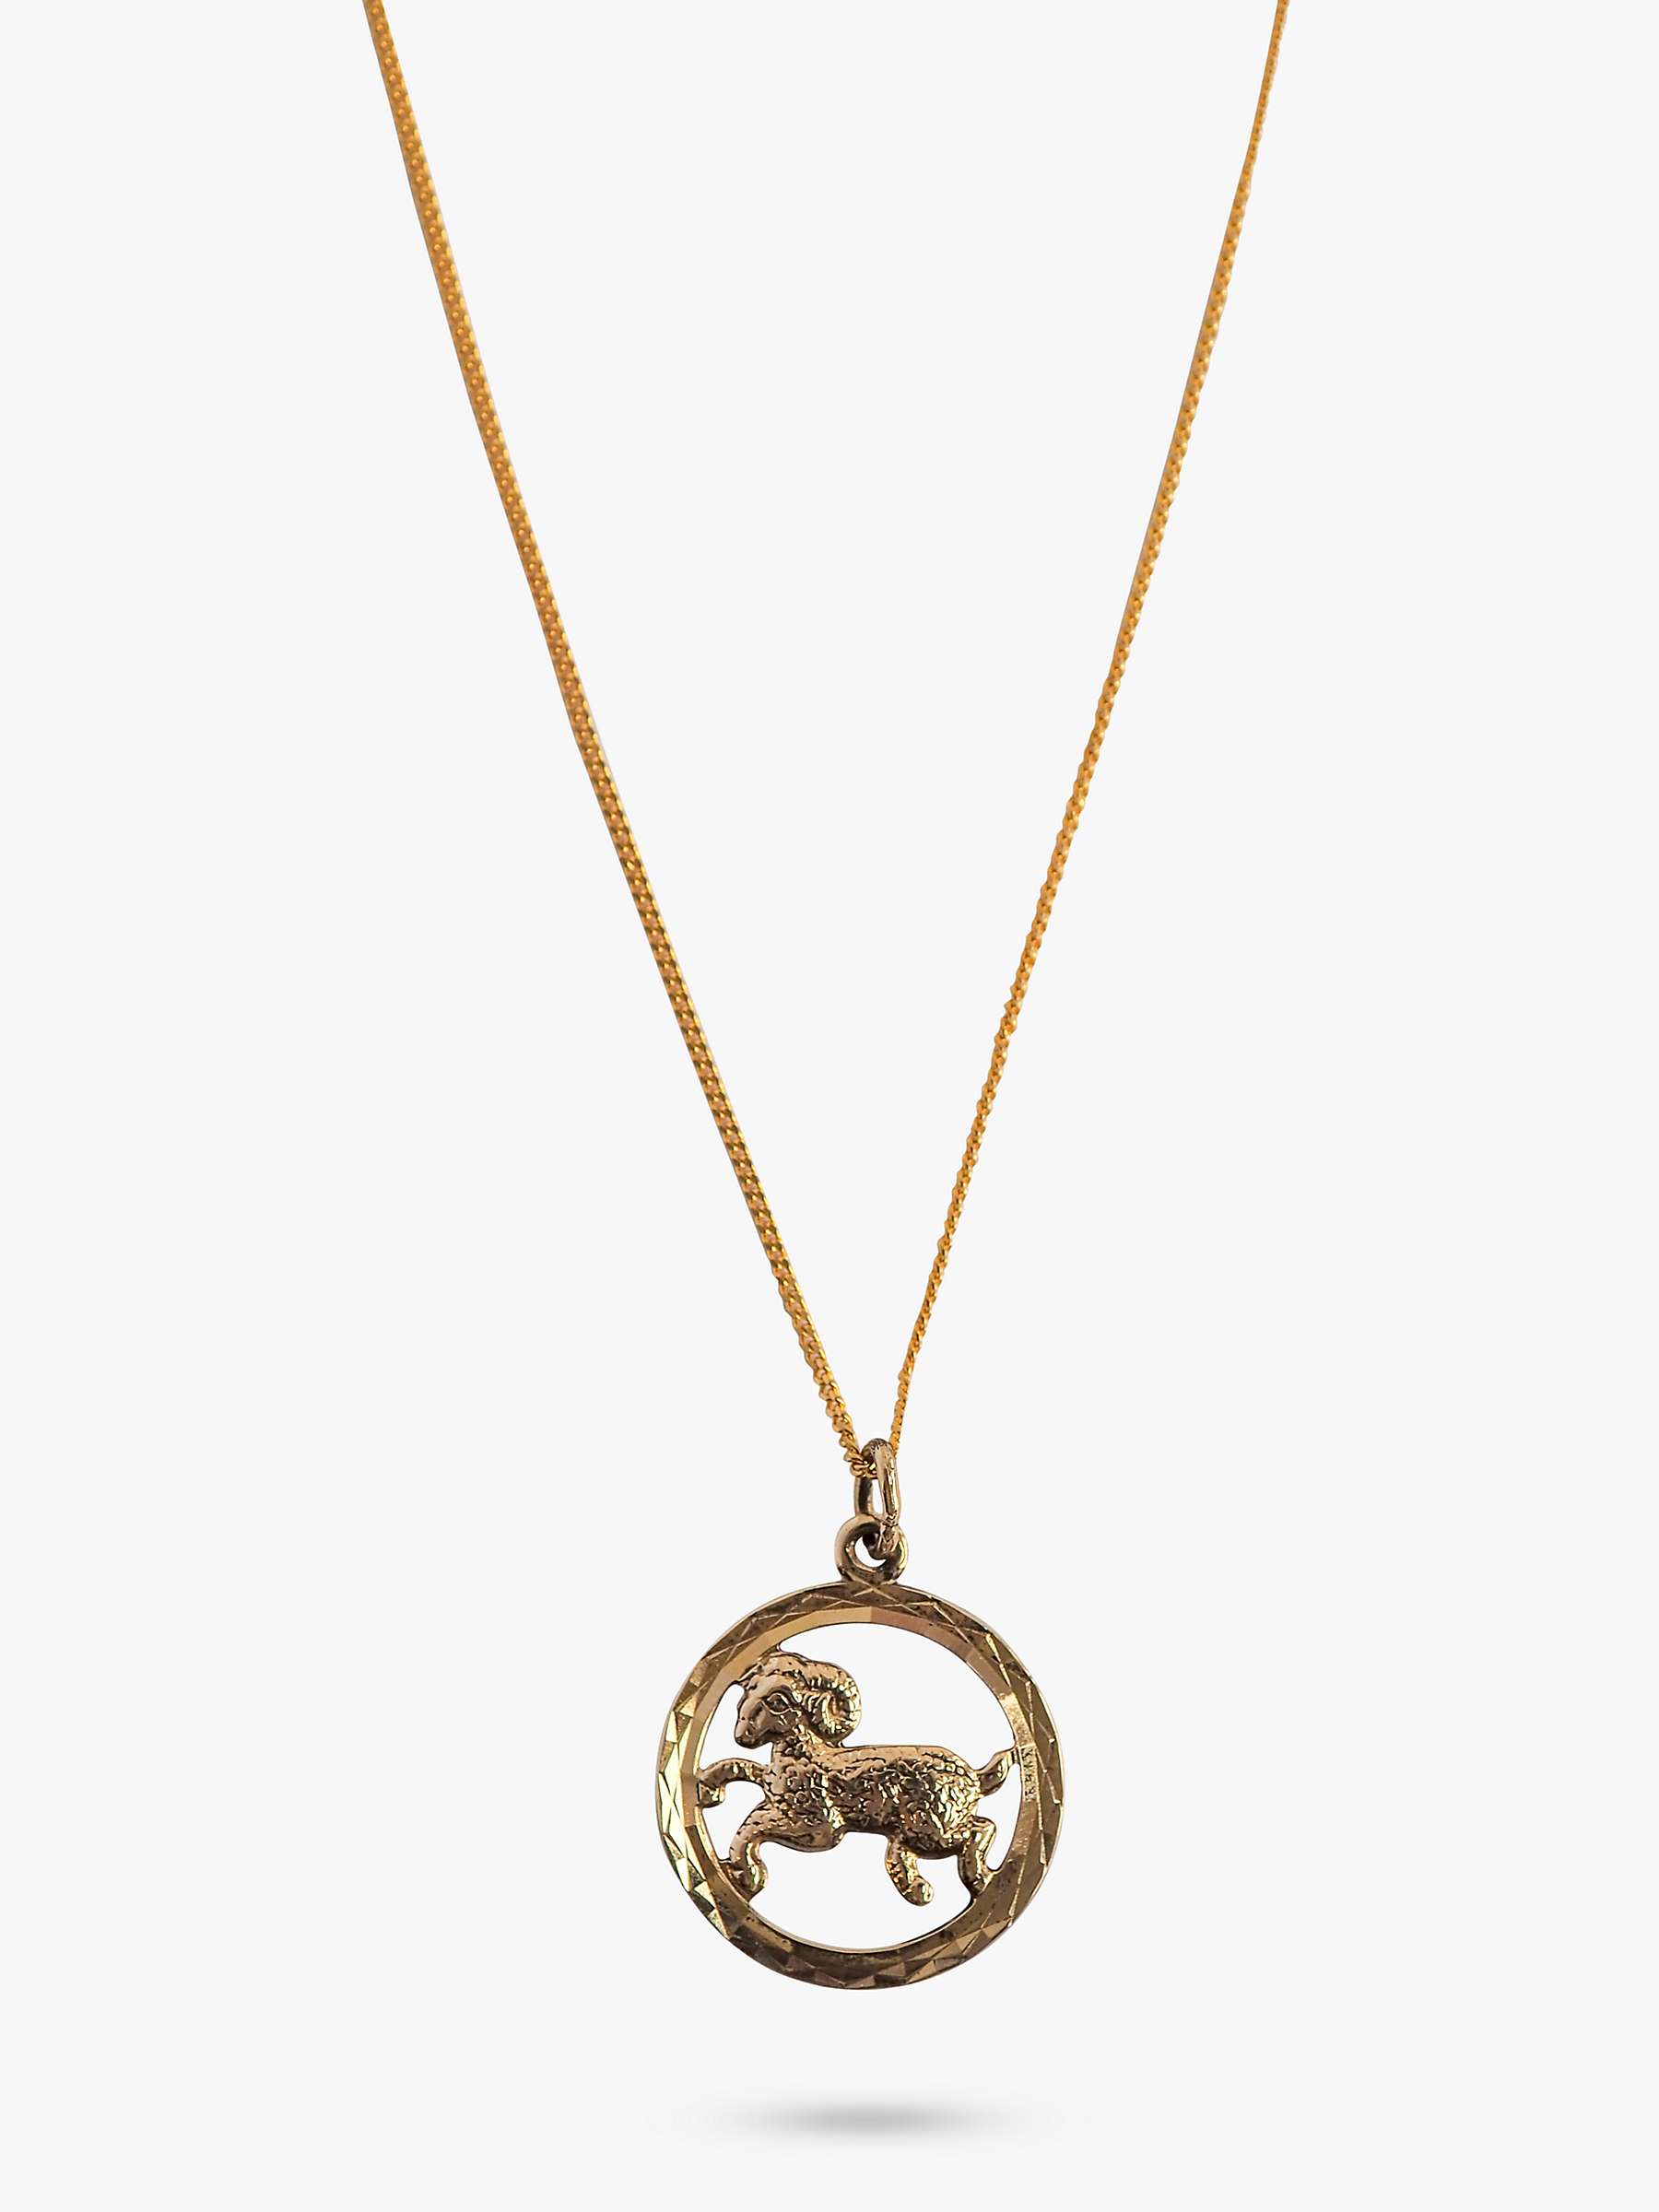 Buy L & T Heirlooms Second Hand 9ct Yellow Gold Aries Pendant Necklace, Dated Circa 1991 Online at johnlewis.com